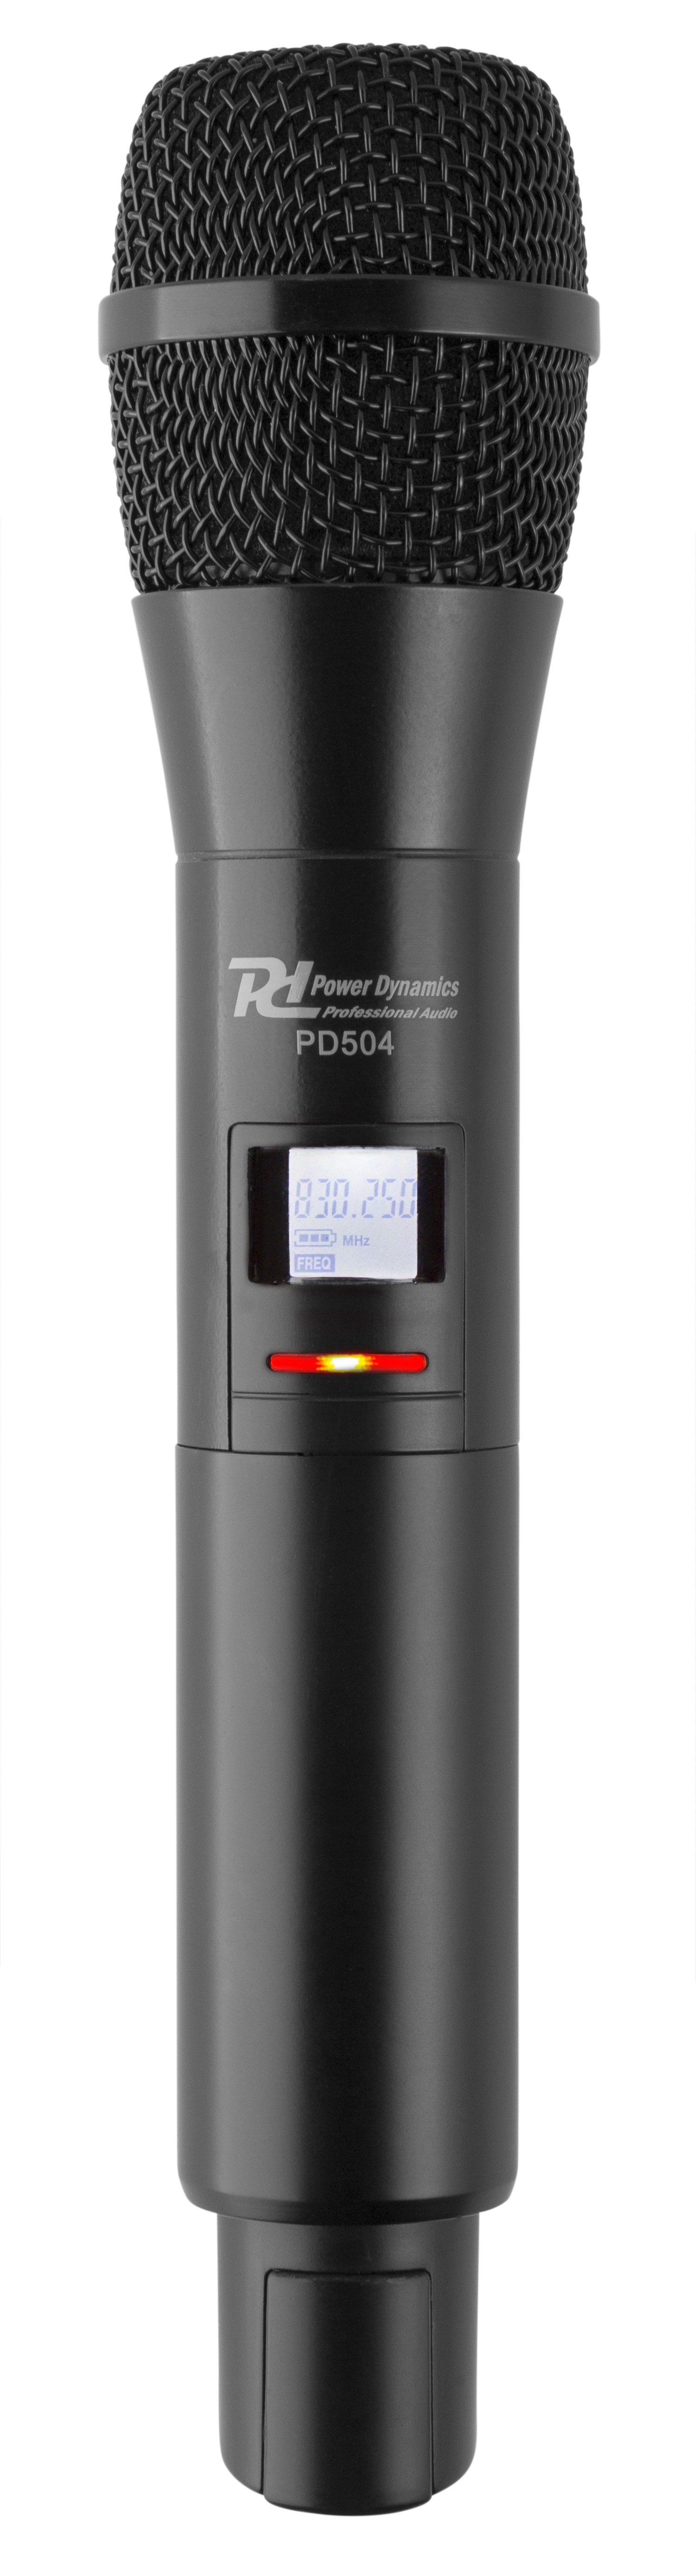 PD504HH Handheld Microphone